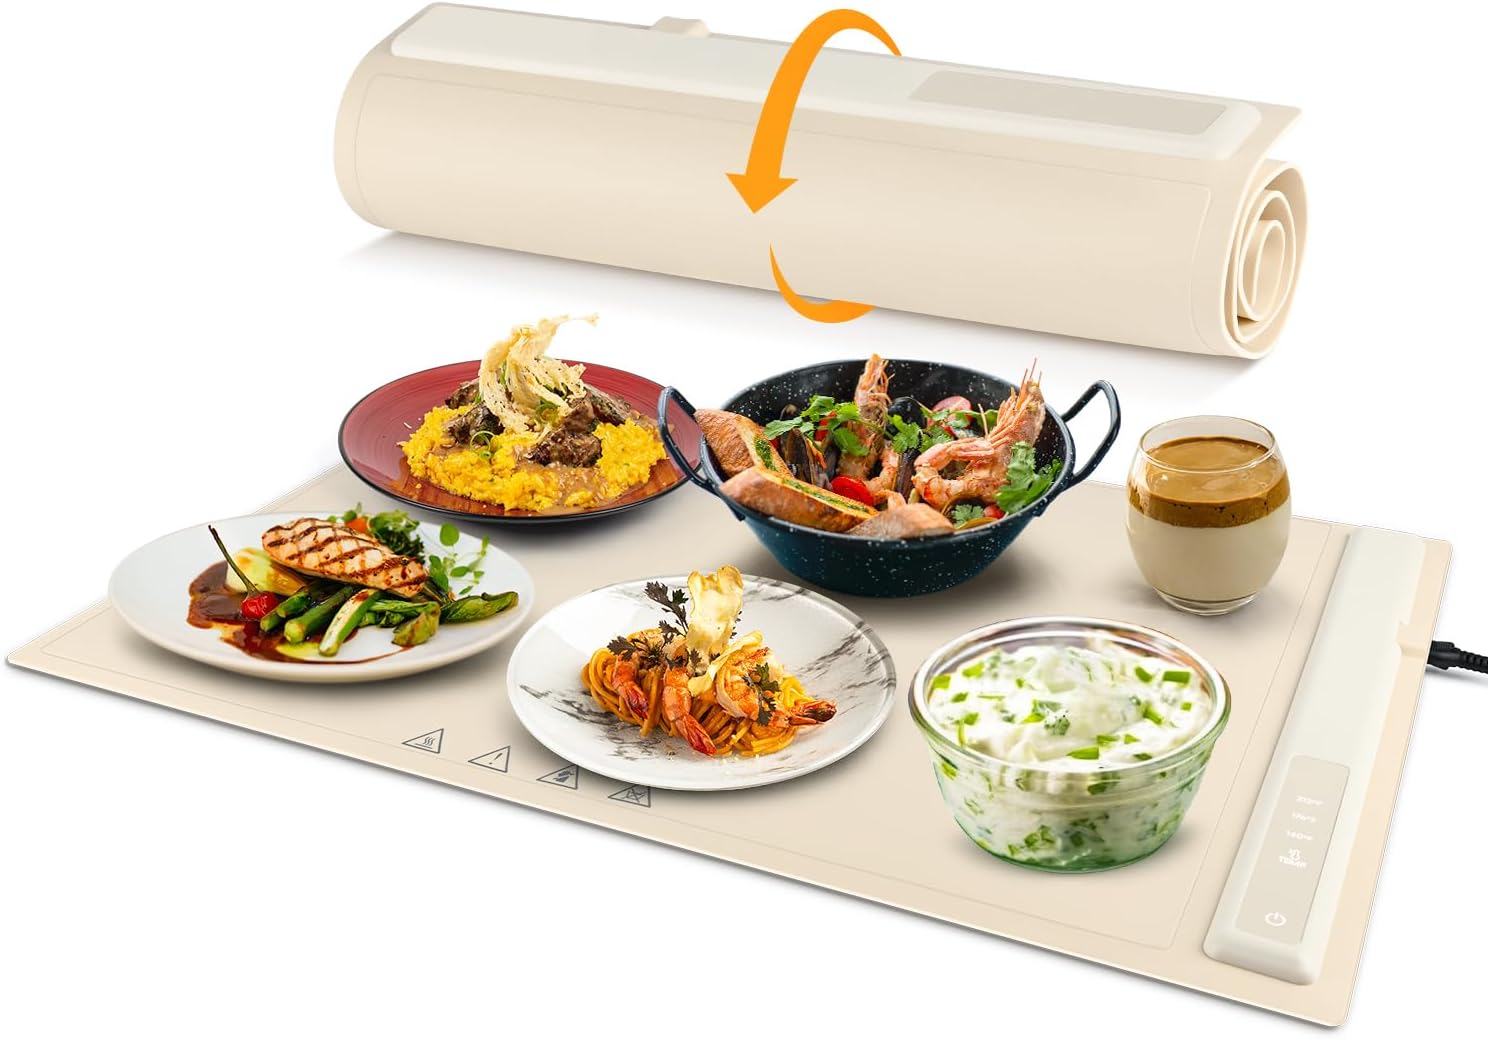 HeatServe - Fast Heating Electric Food Serving Tray - Whomely